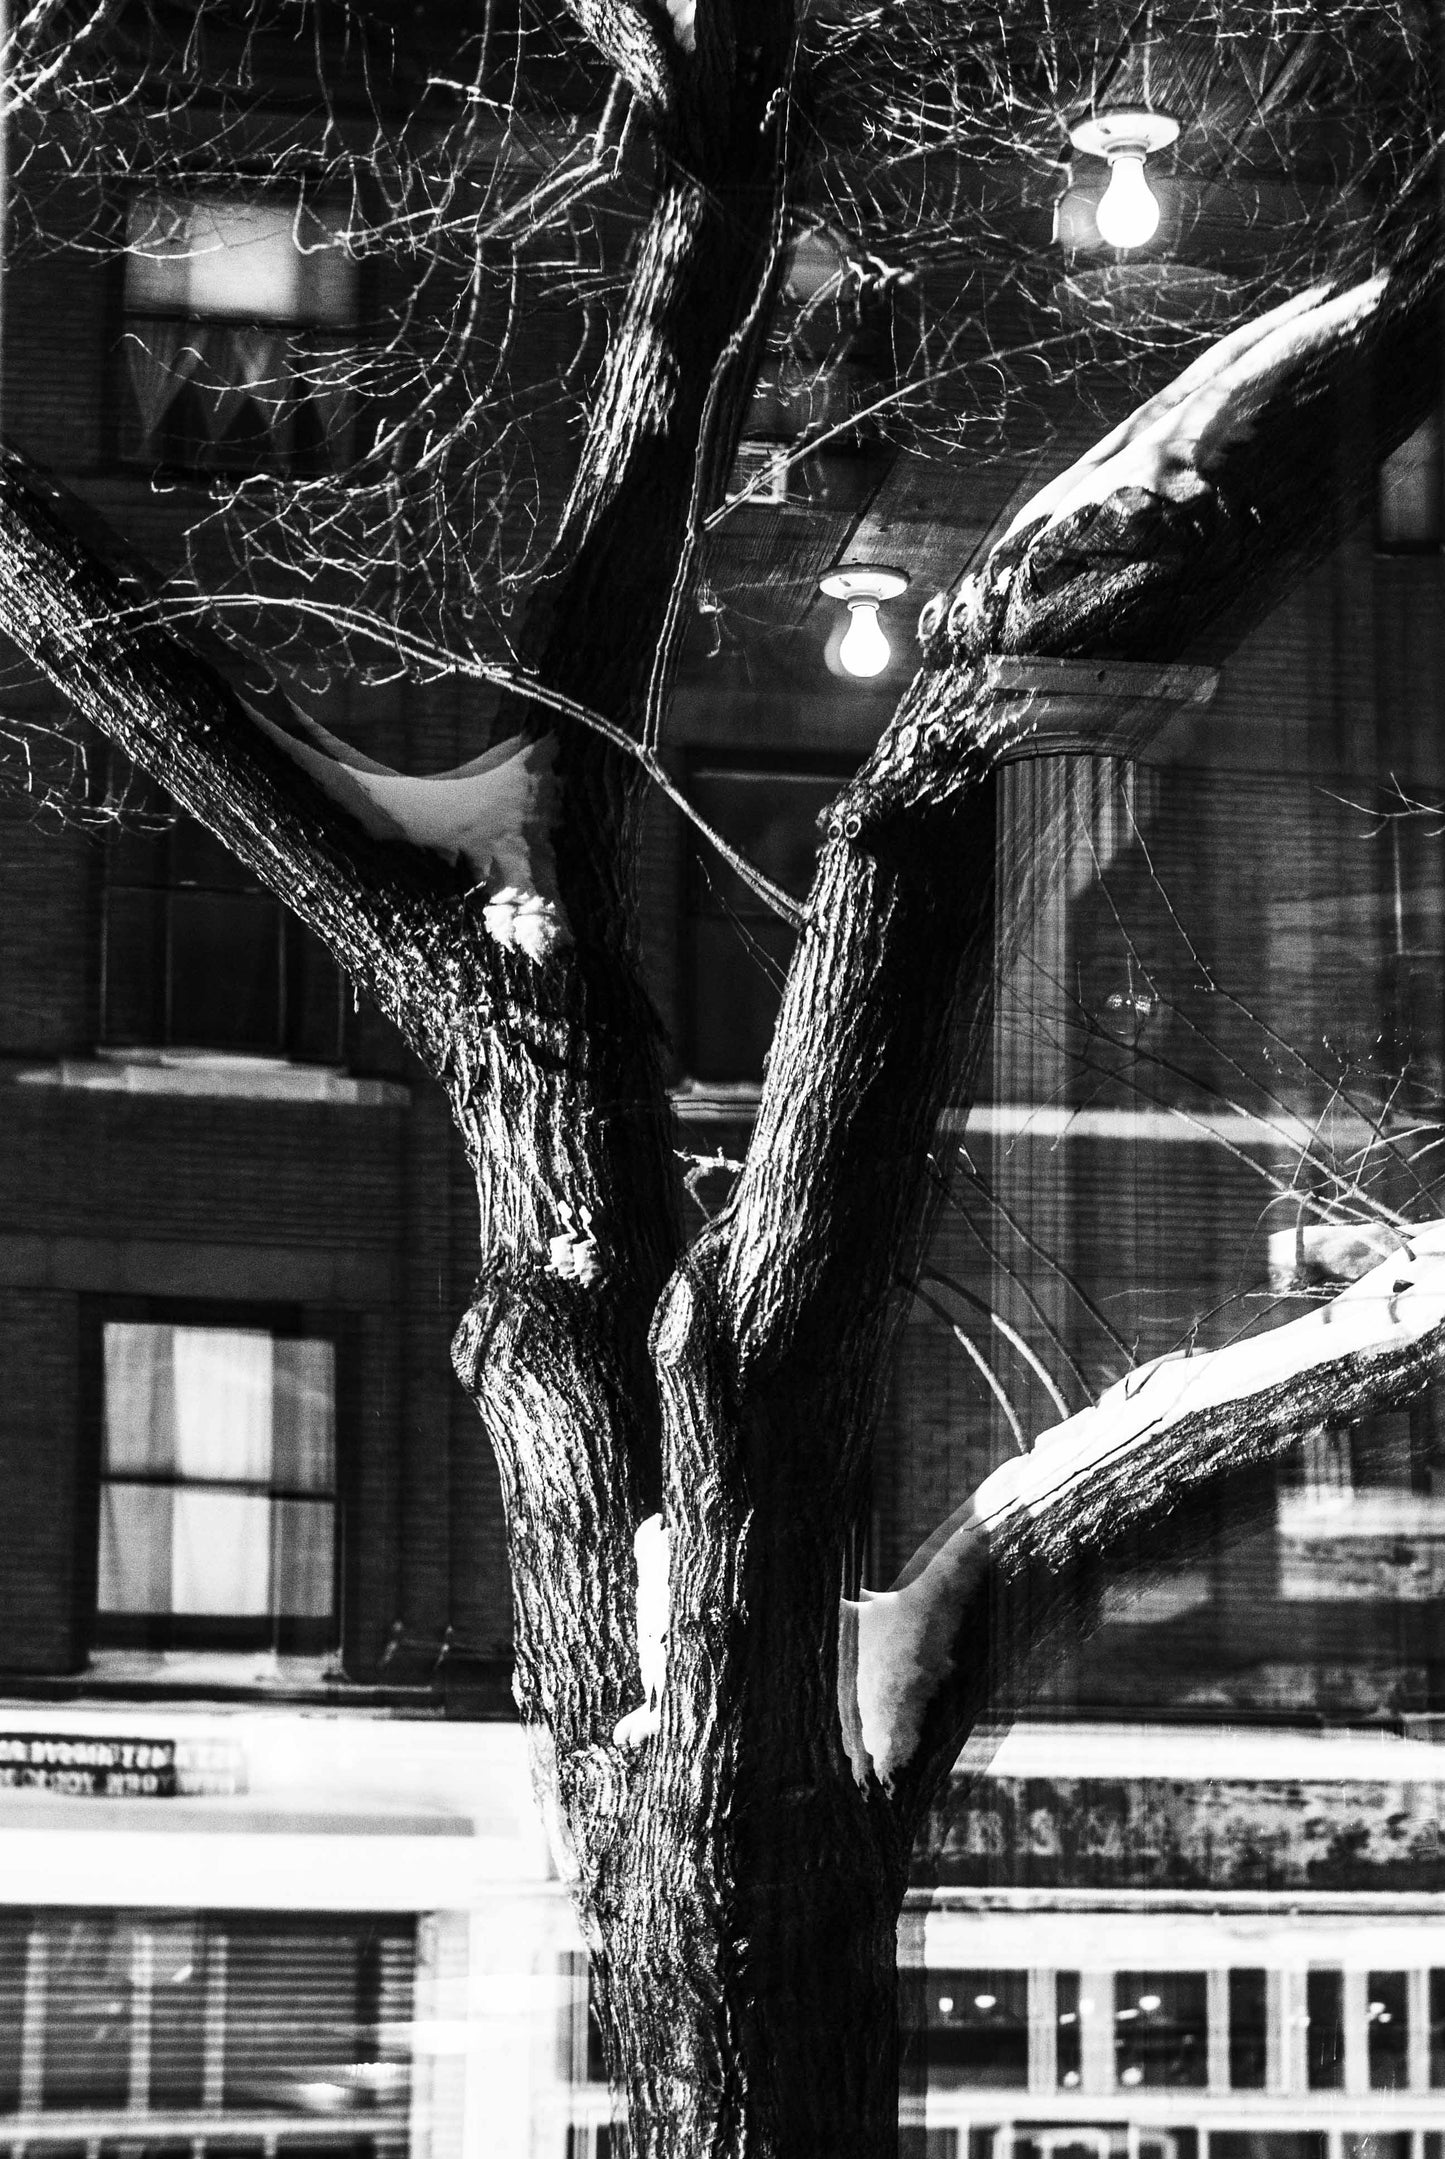 SHADOW OF A TREE, Upper West Side, New York